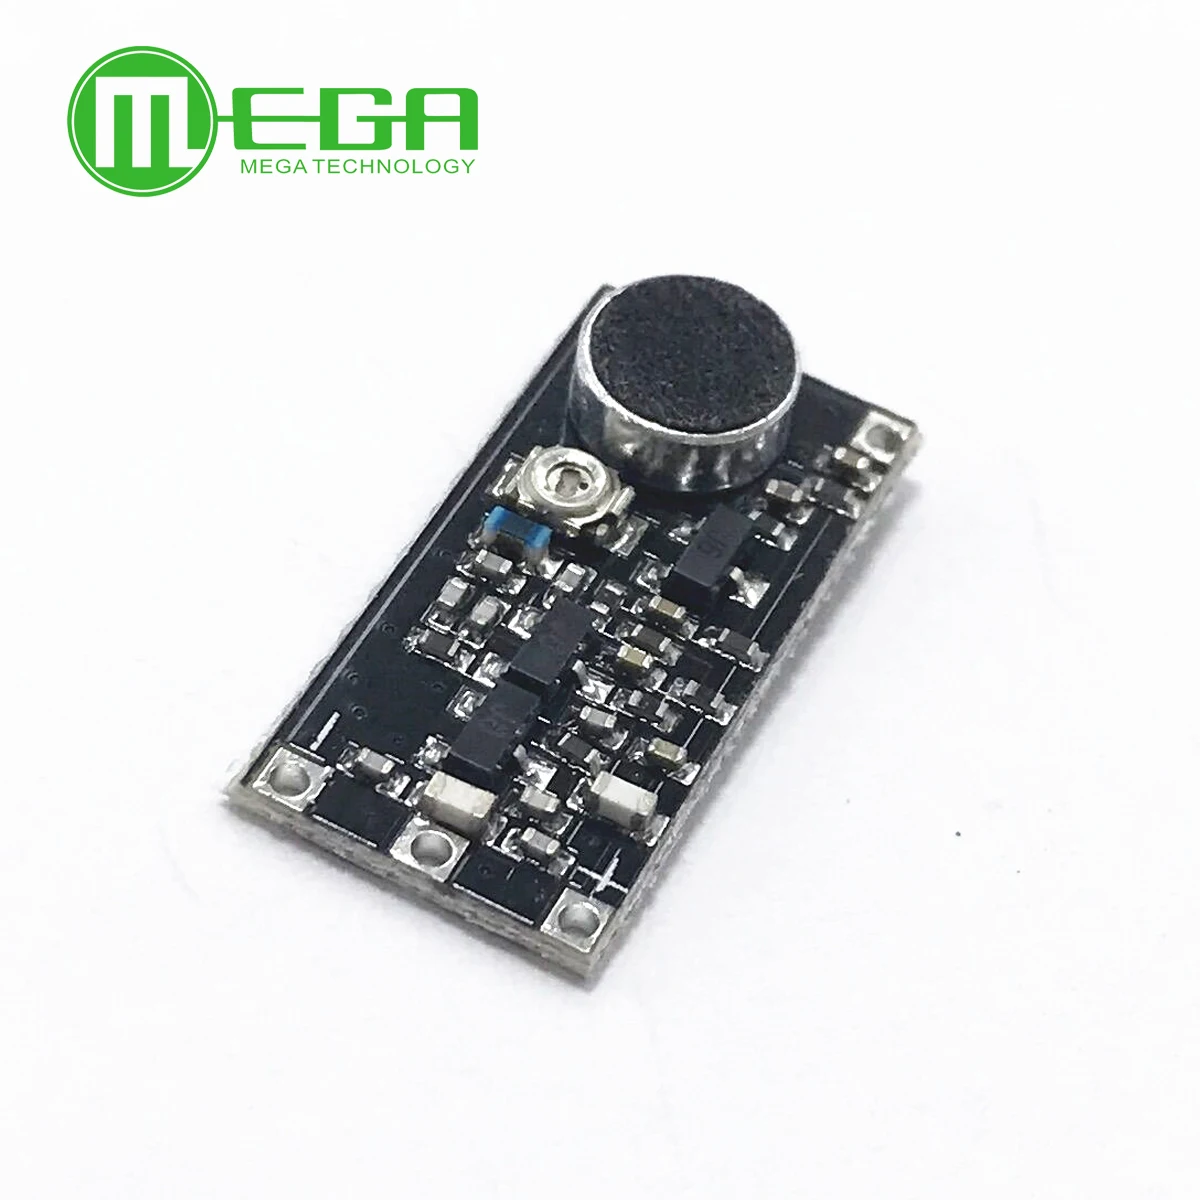 

88-115MHz FM Wireless Microphone Surveillance Transmitter Module Board For Arduino Adjustable Capacitor DC 2V 9V 9mA Voltage